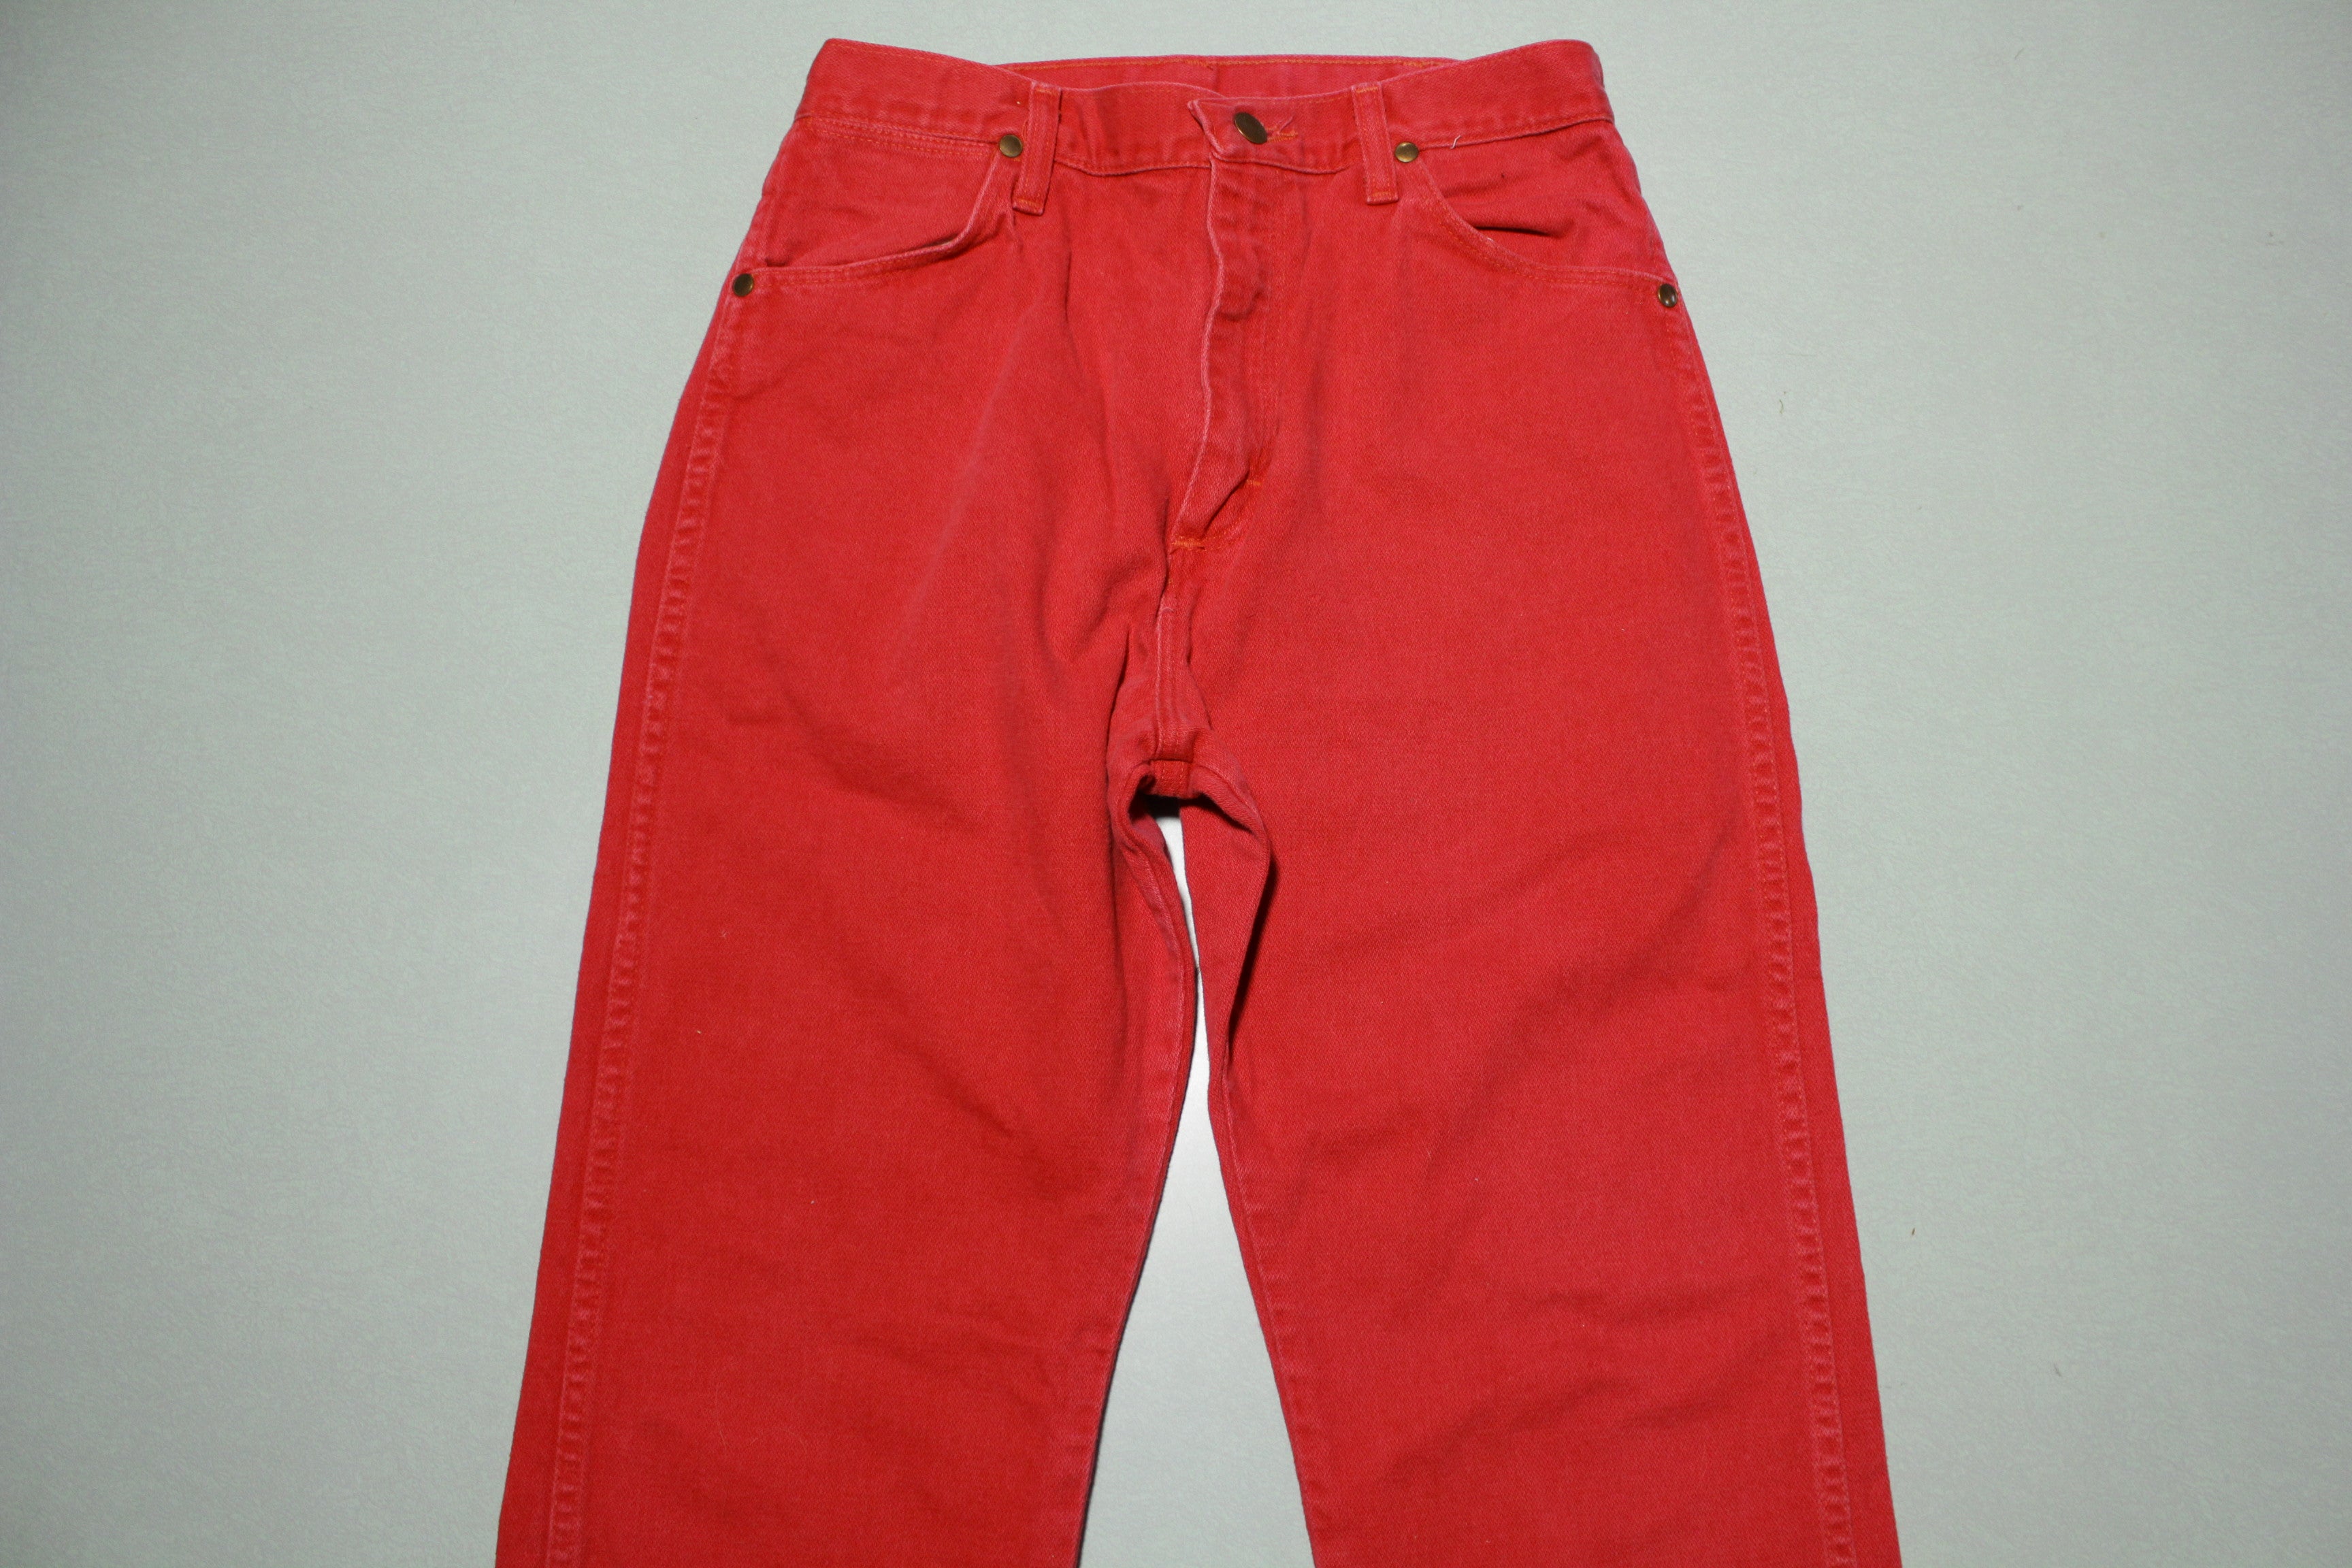 Wrangler Red Vintage 80's Denim Made in USA Cowboy Rodeo Jeans